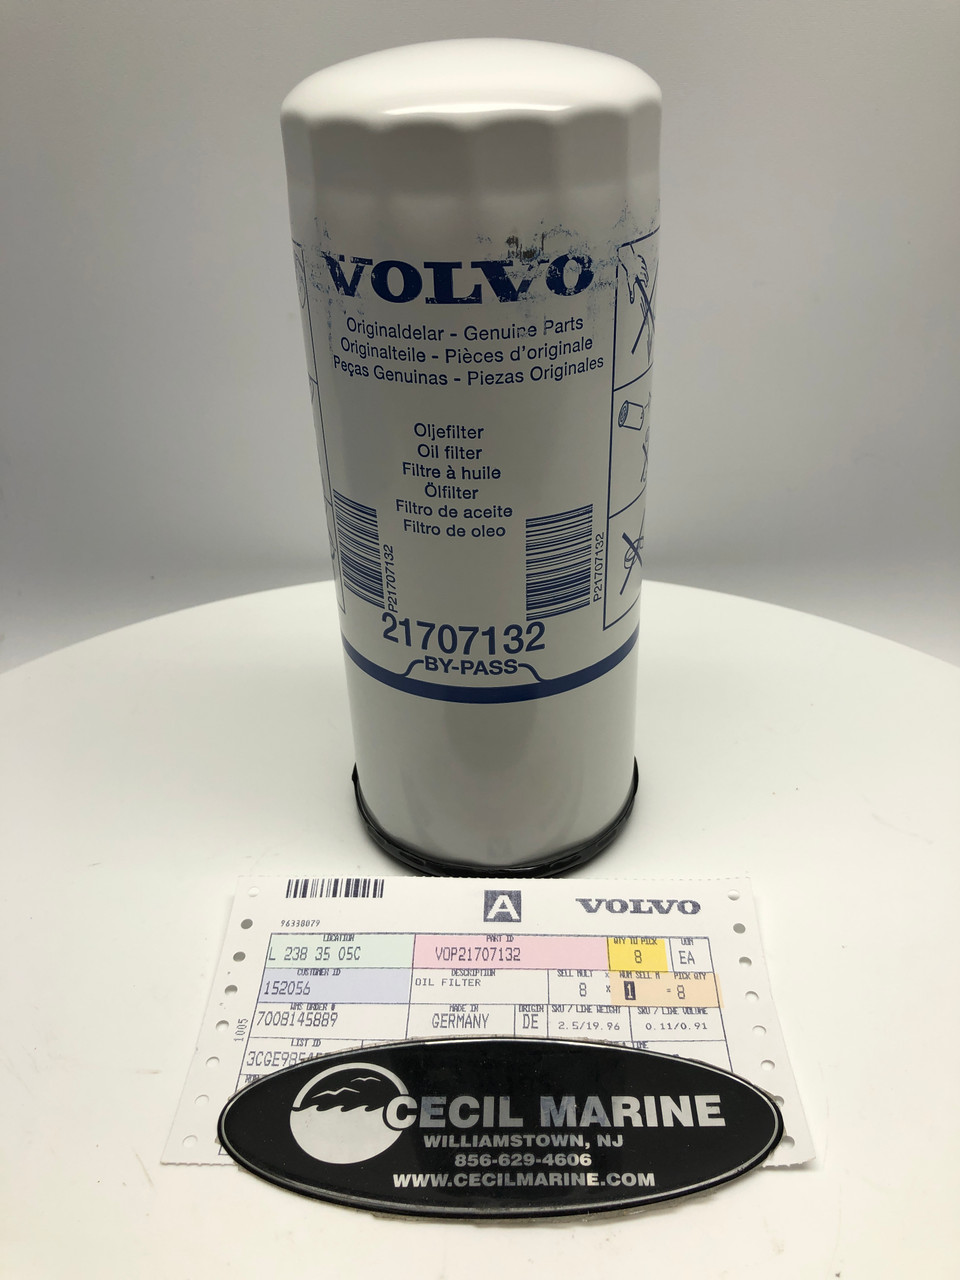 $25.99* GENUINE VOLVO no tax* OIL FILTER 21707132  *In Stock & Ready To Ship!